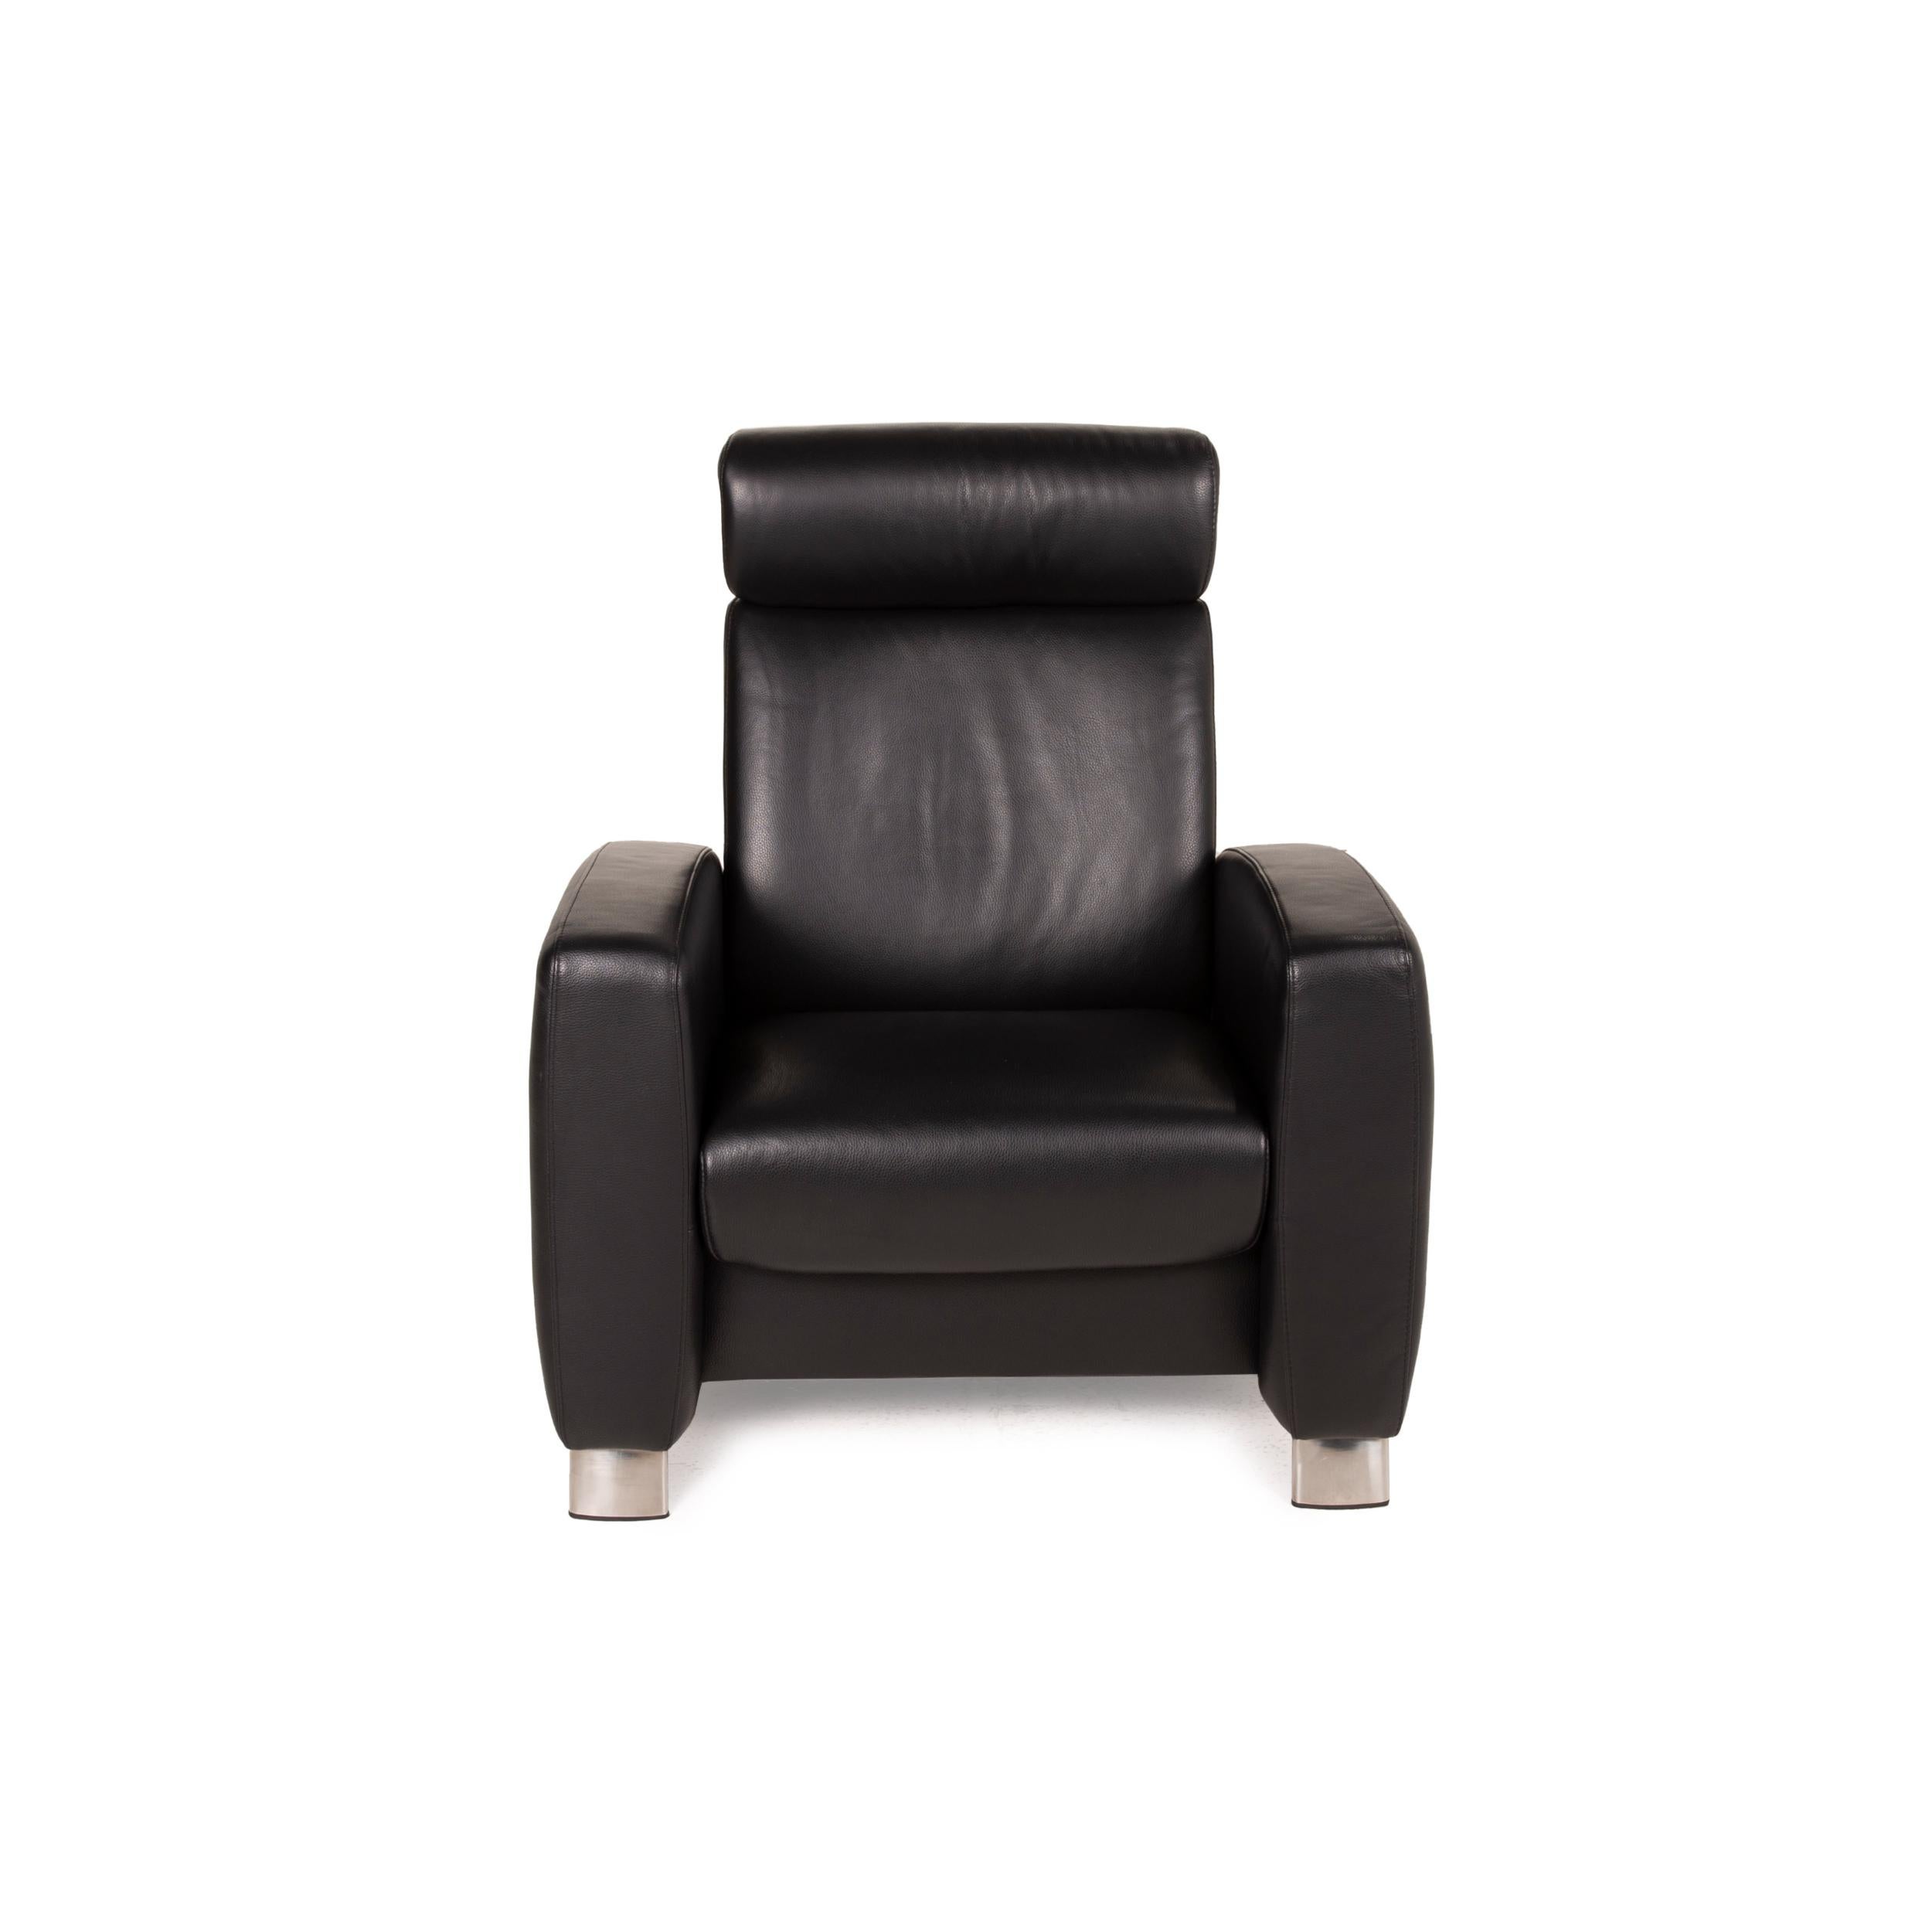 Contemporary Stressless Arion Leather Armchair Black Relax Function For Sale